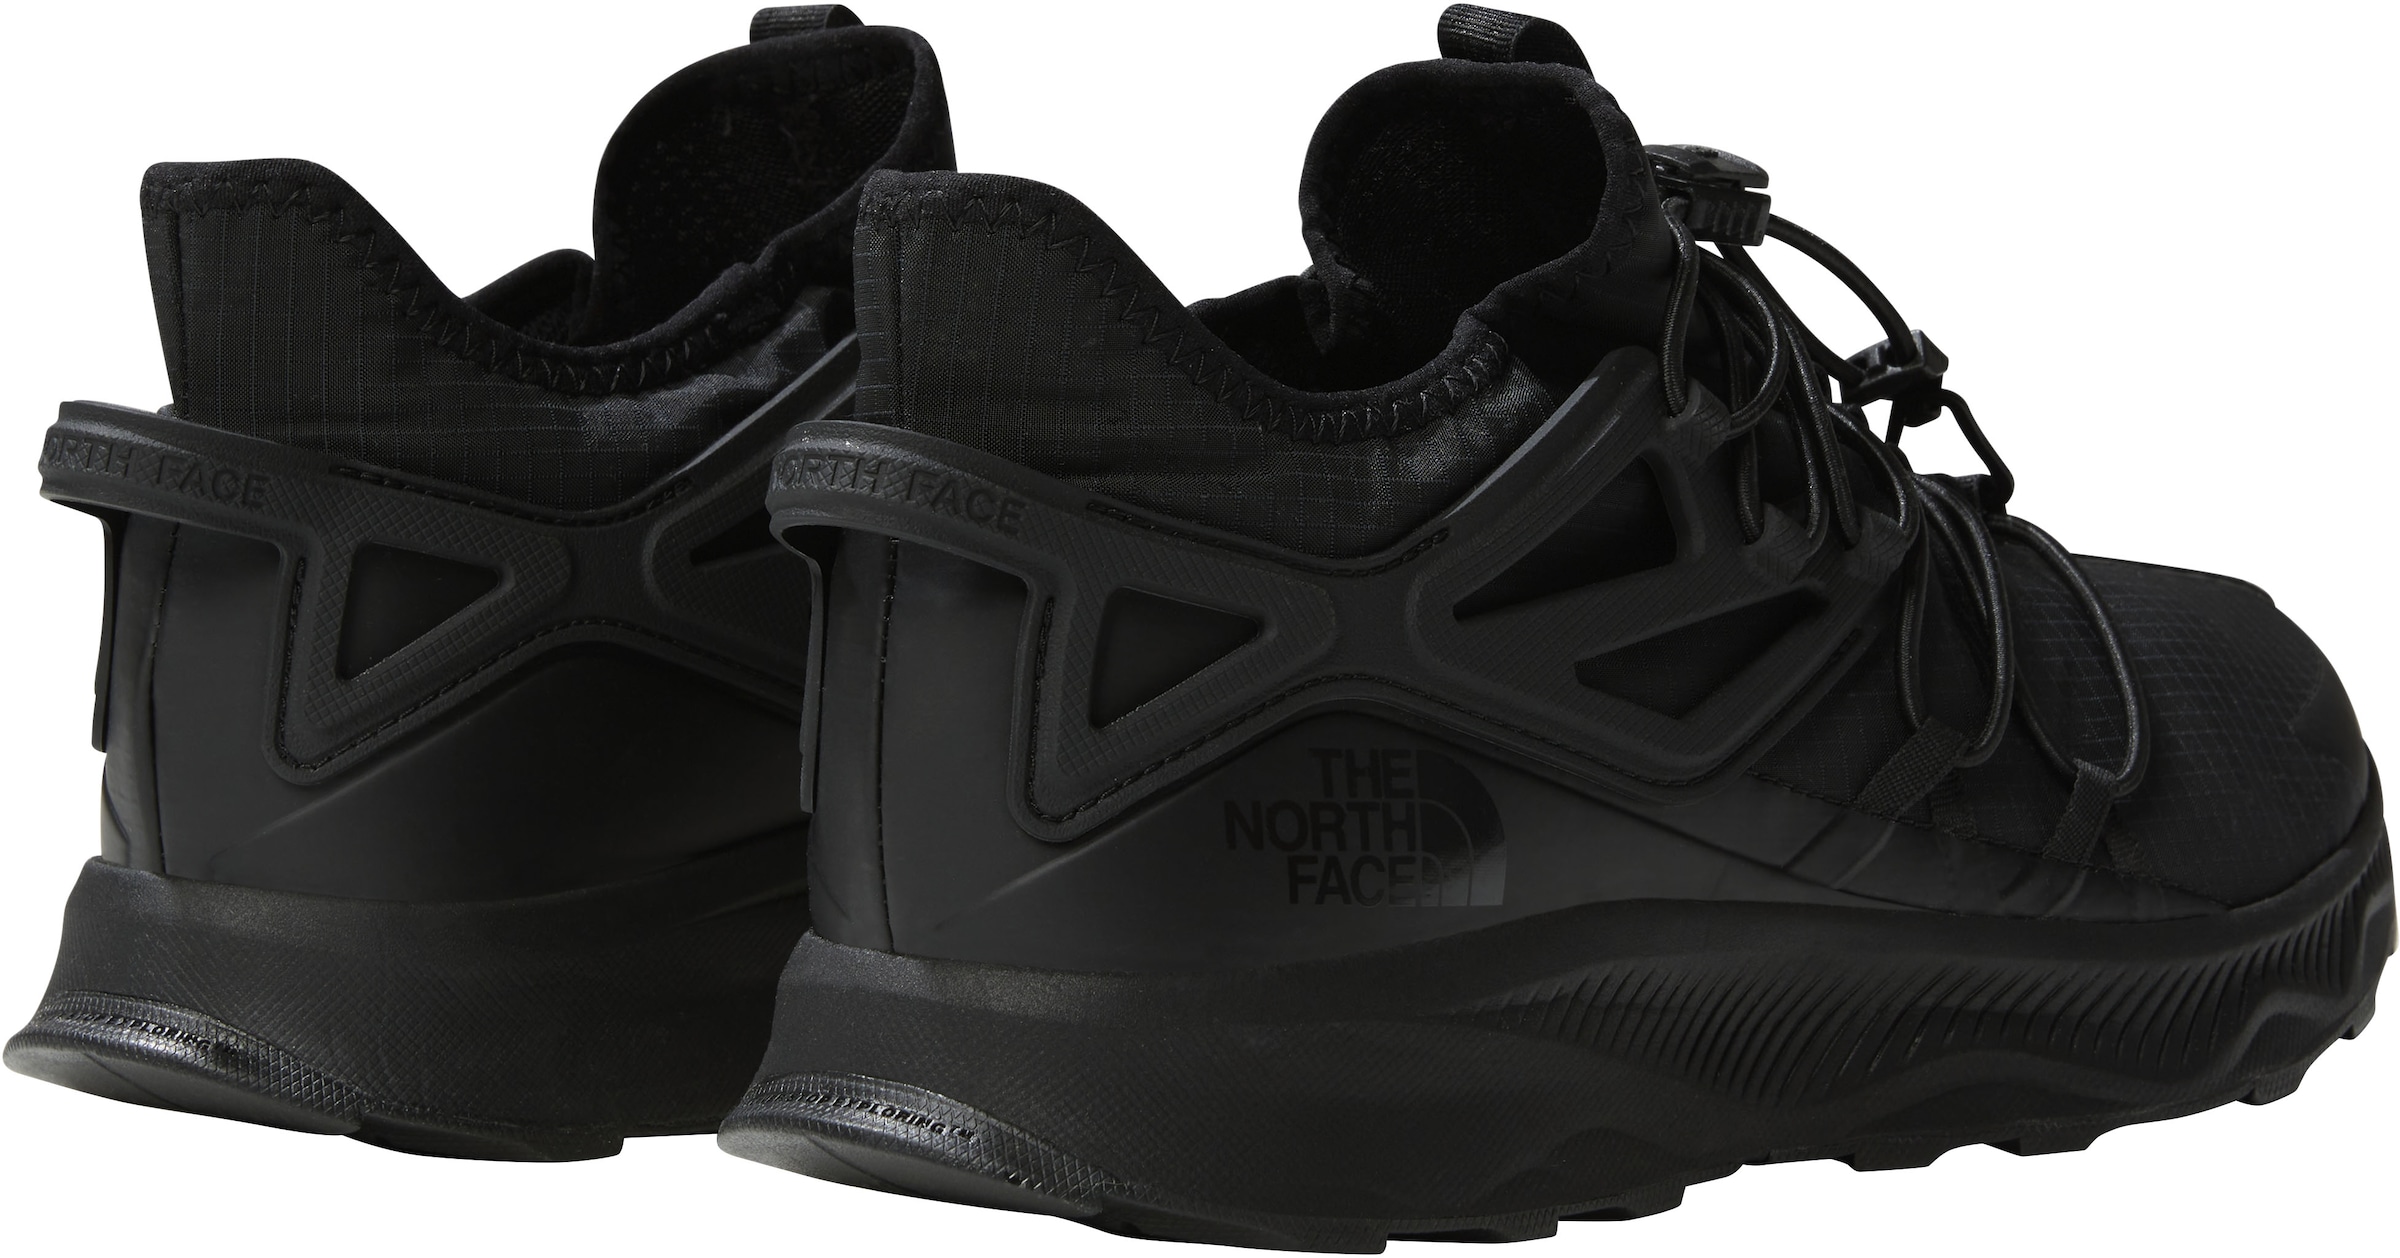 The North Face Wanderschuh »M OXEYE TECH«